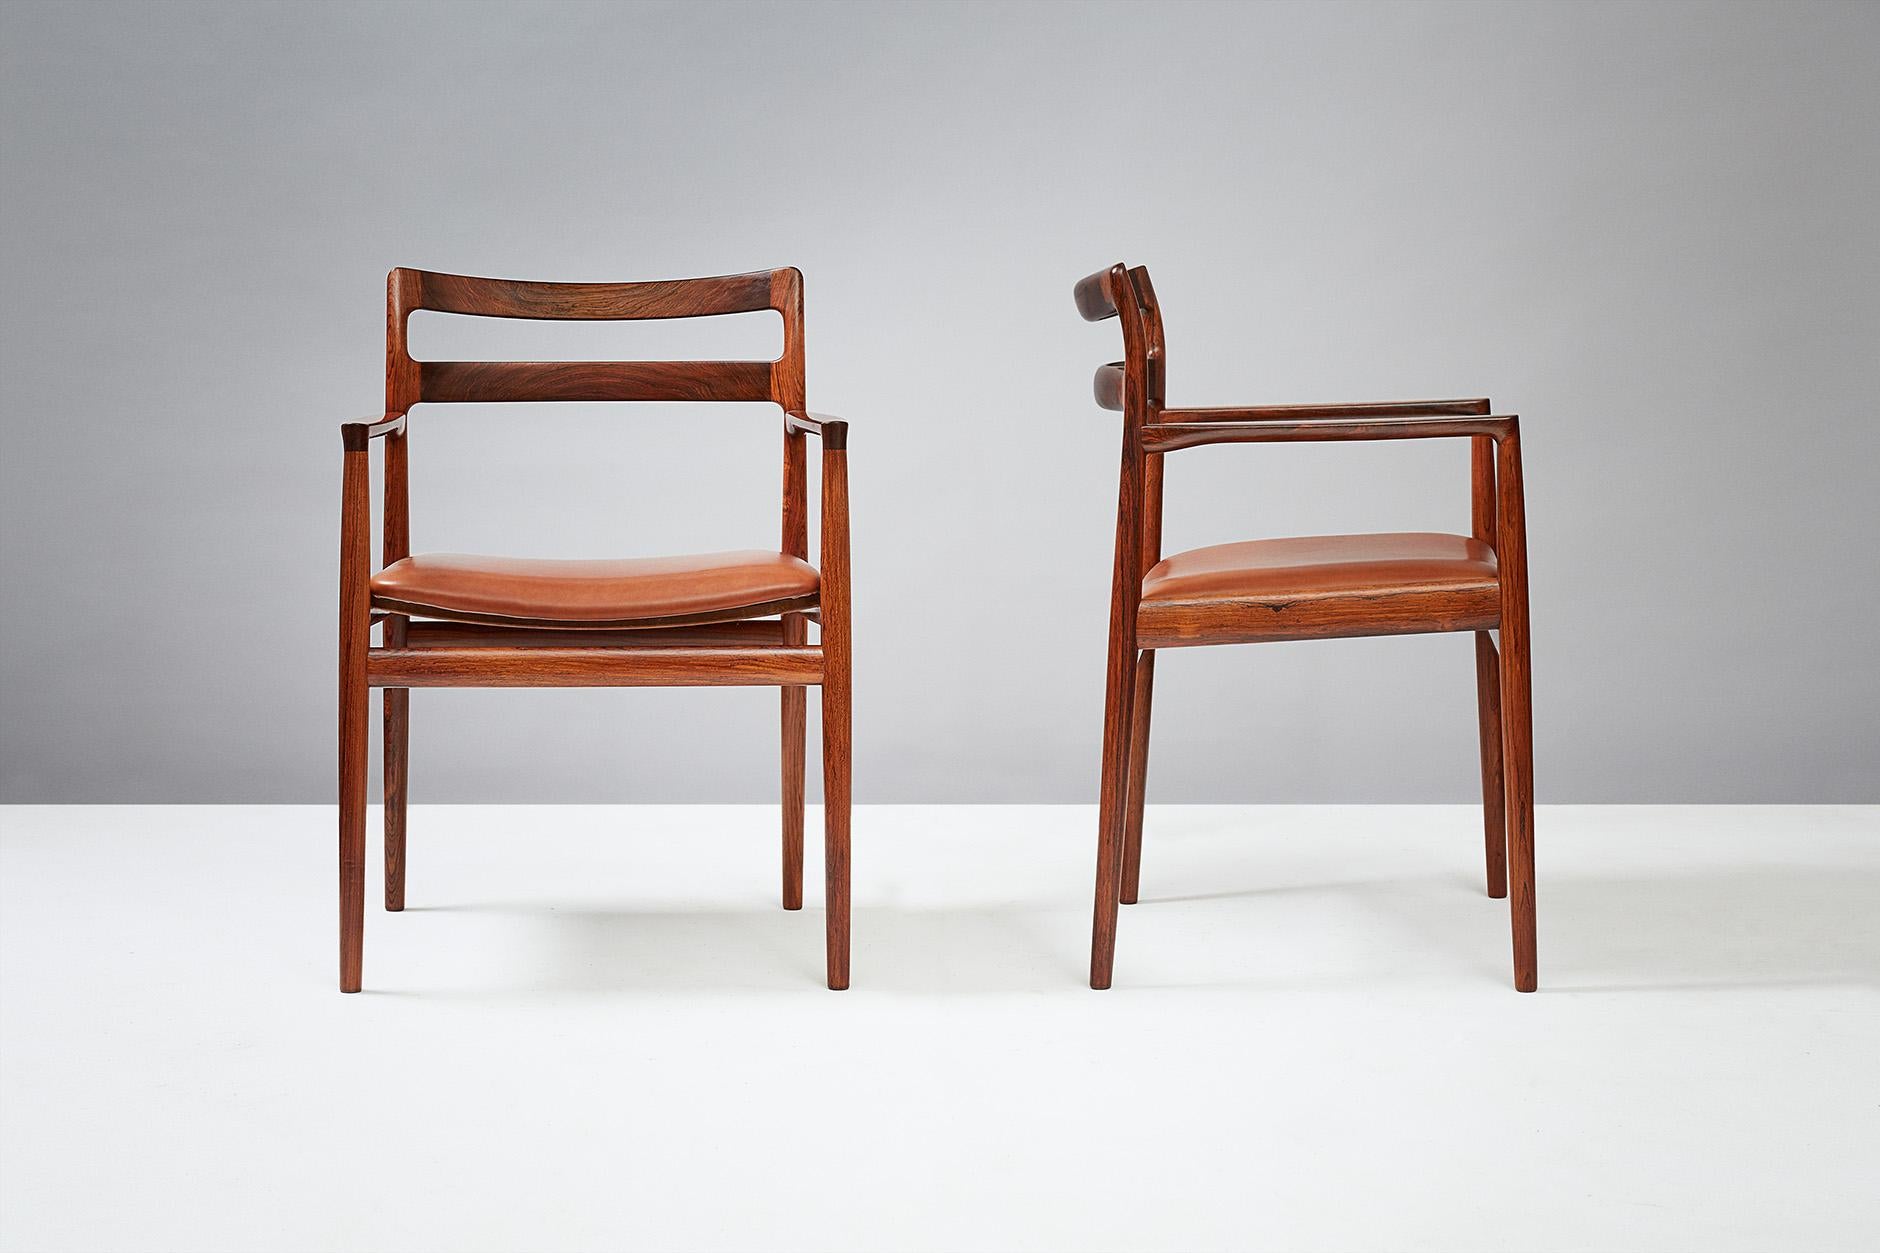 Johannes Nørgaard

Armchairs, circa 1960

Pair of armchairs attributed to Johannes Nørgaard and produced in stunning, exotic rosewood by Nørgaard Møbelfabrik, circa 1960 in Denmark. Seats upholstered in cognac brown aniline leather.